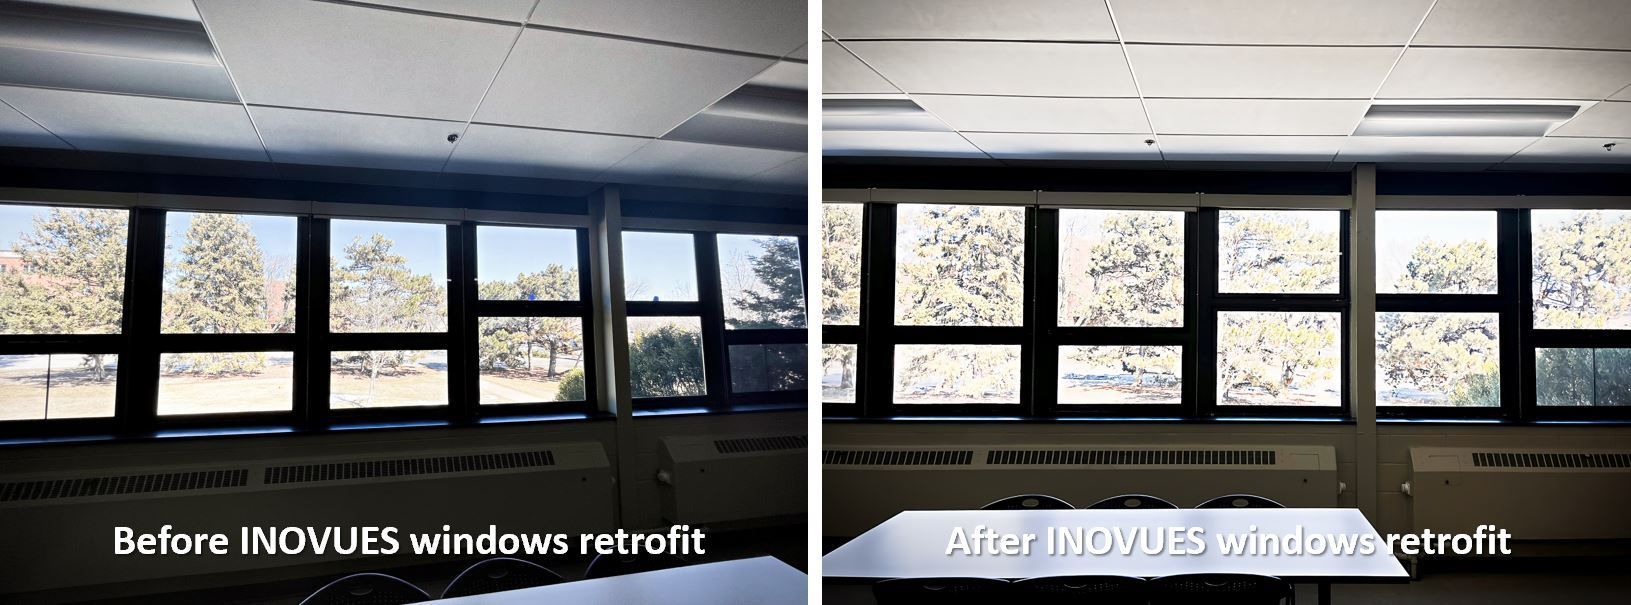 INOVUES Window Retrofit for the University of Minnesota's St. Paul Campus's Facility Building 3